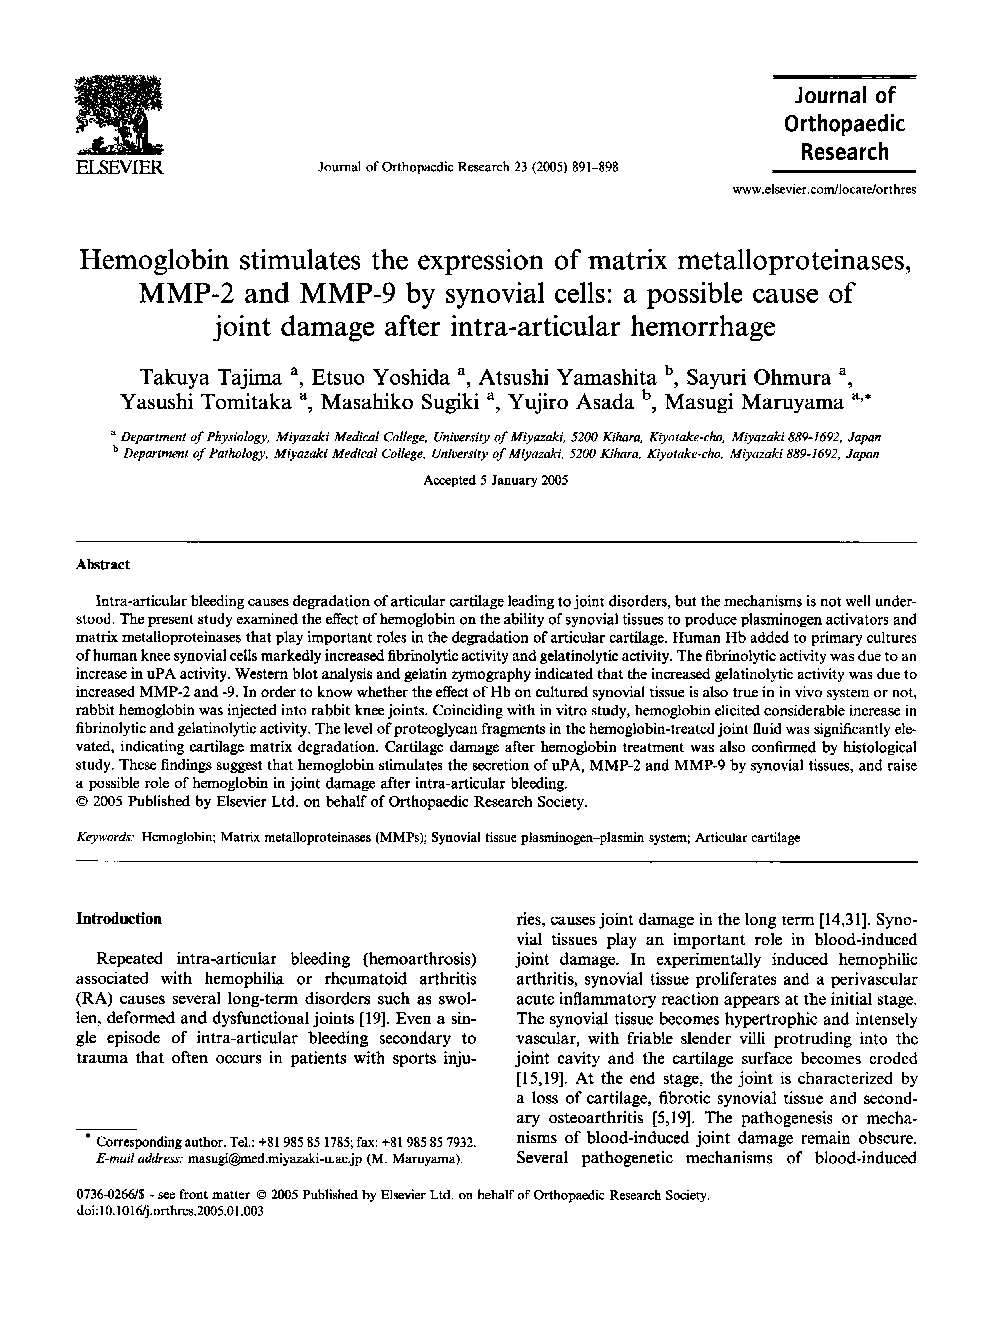 Hemoglobin stimulates the expression of matrix metalloproteinases, MMP-2 and MMP-9 by synovial cells: a possible cause of joint damage after intra-articular hemorrhage